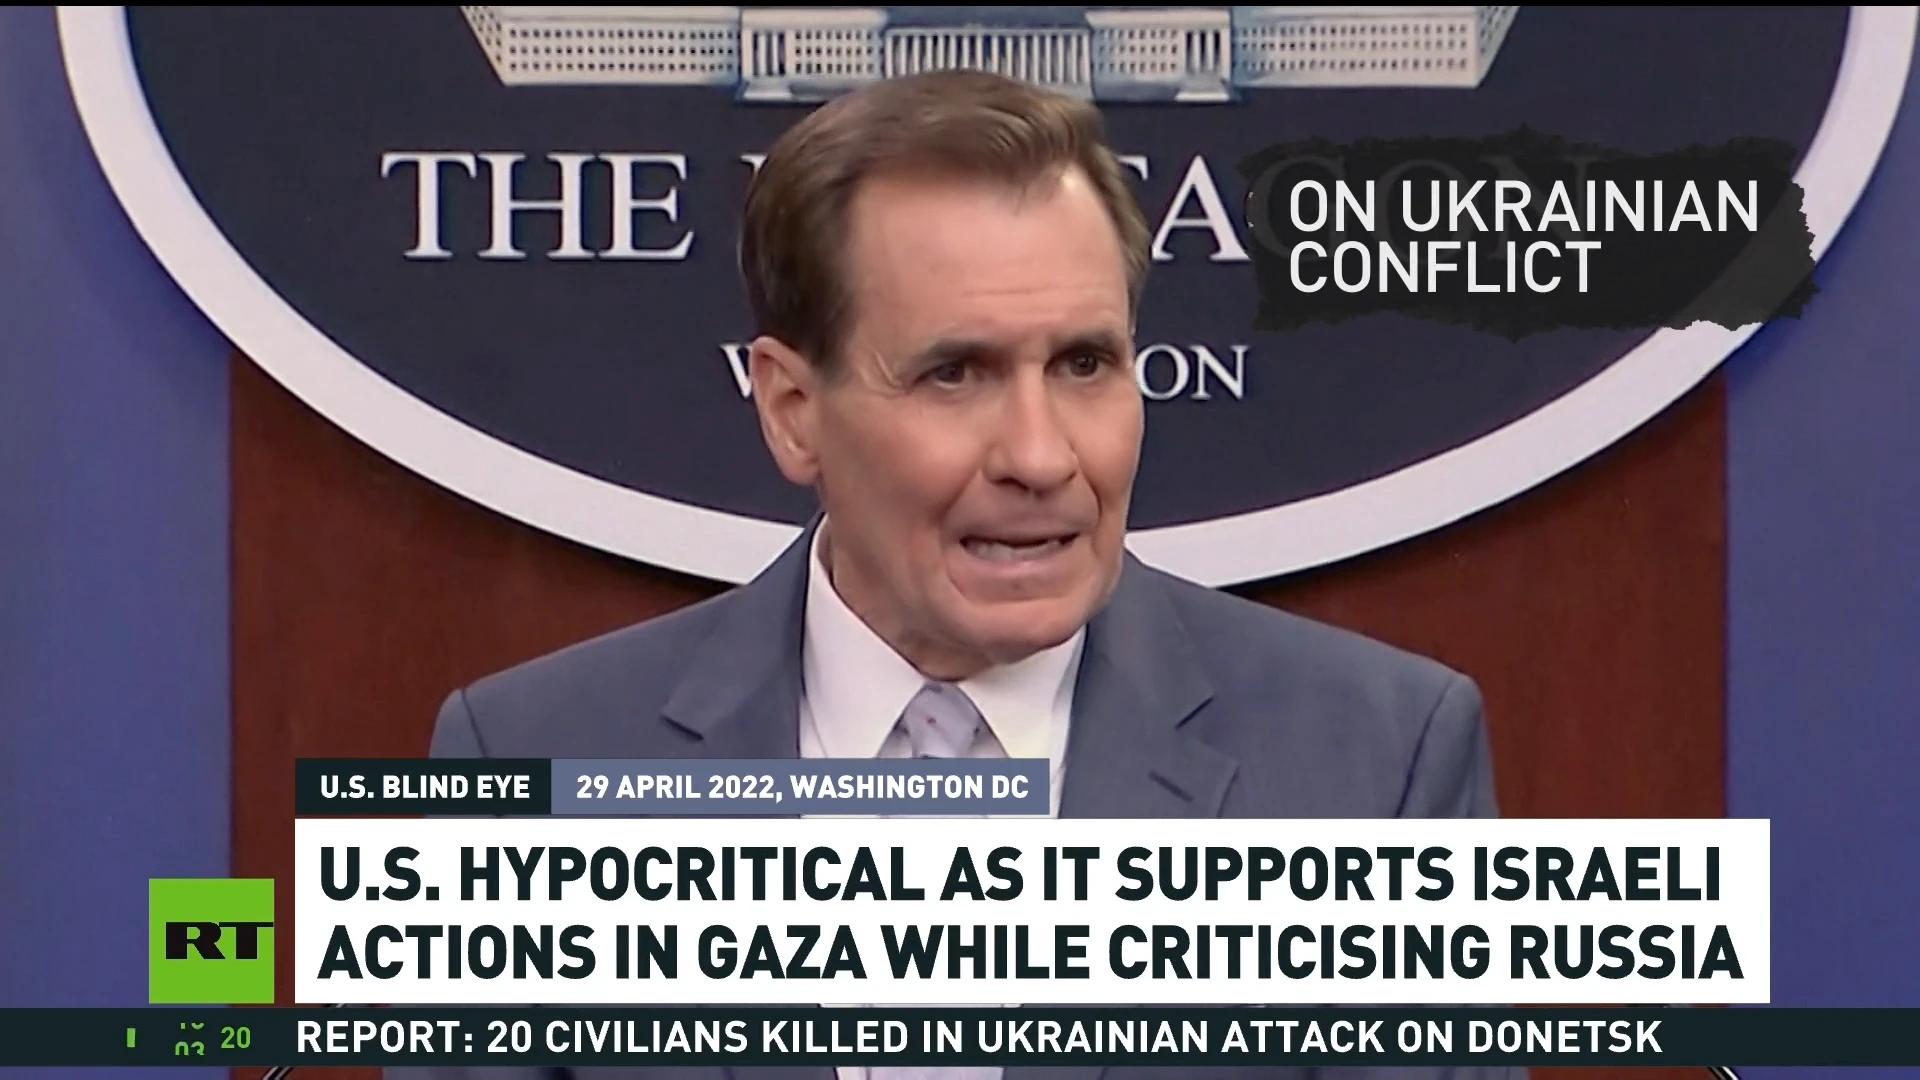 US hypocrisy on display as it supports Israeli actions while bashing Russia